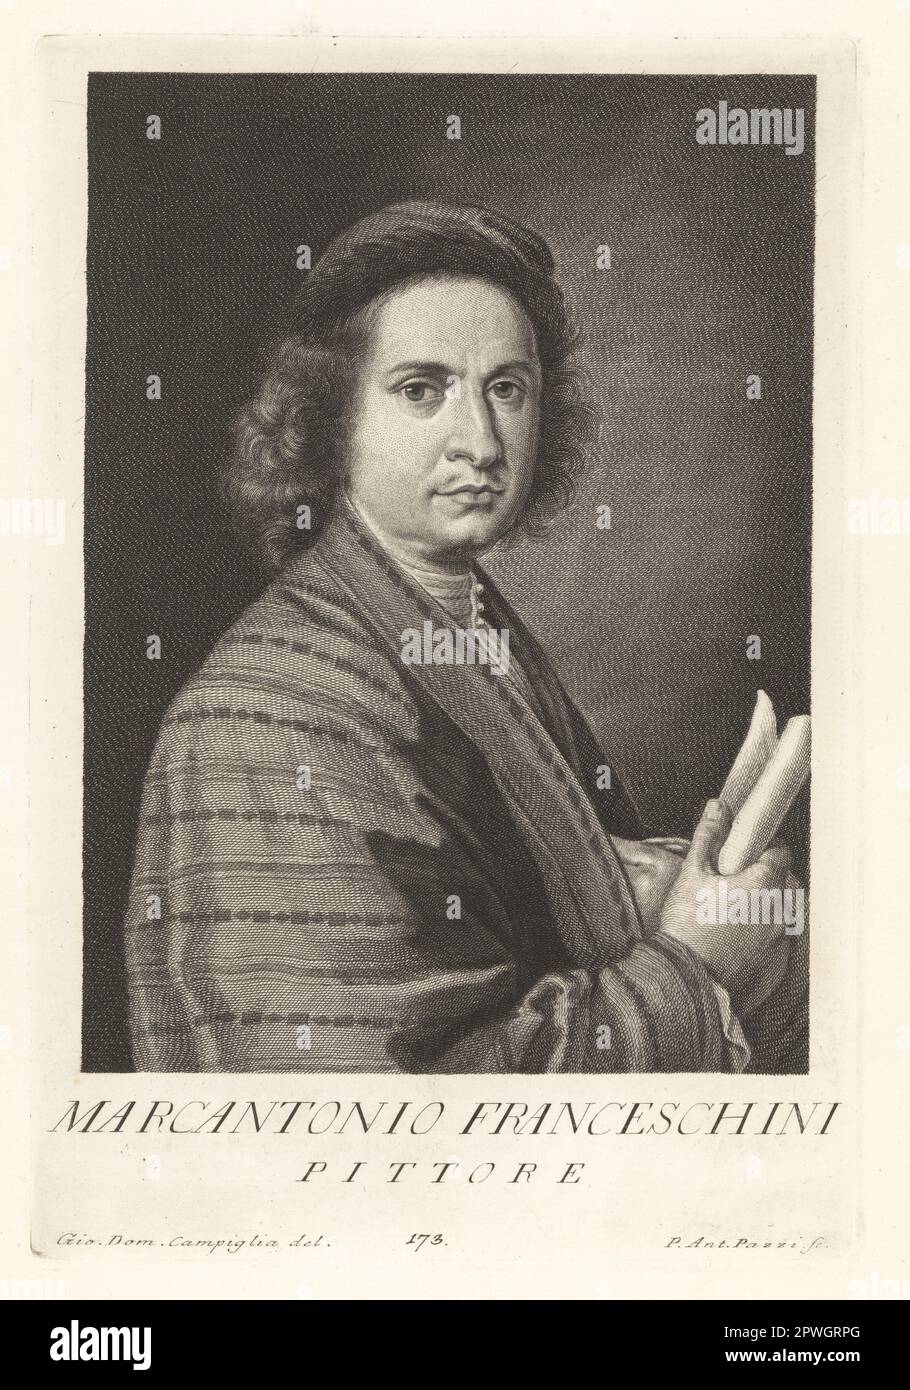 Marcantonio Franceschini, Italian painter of the Baroque period, active mostly in his native Bologna, 1648-1729. He was the father and teacher of Giacomo Franceschini. Pittore. Copperplate engraving by Pietro Antonio Pazzi after Giovanni Domenico Campiglia after a self portrait by the artist from Francesco Moucke's Museo Florentino (Museum Florentinum), Serie di Ritratti de Pittori (Series of Portraits of Painters) stamperia Mouckiana, Florence, 1752-62. Stock Photo